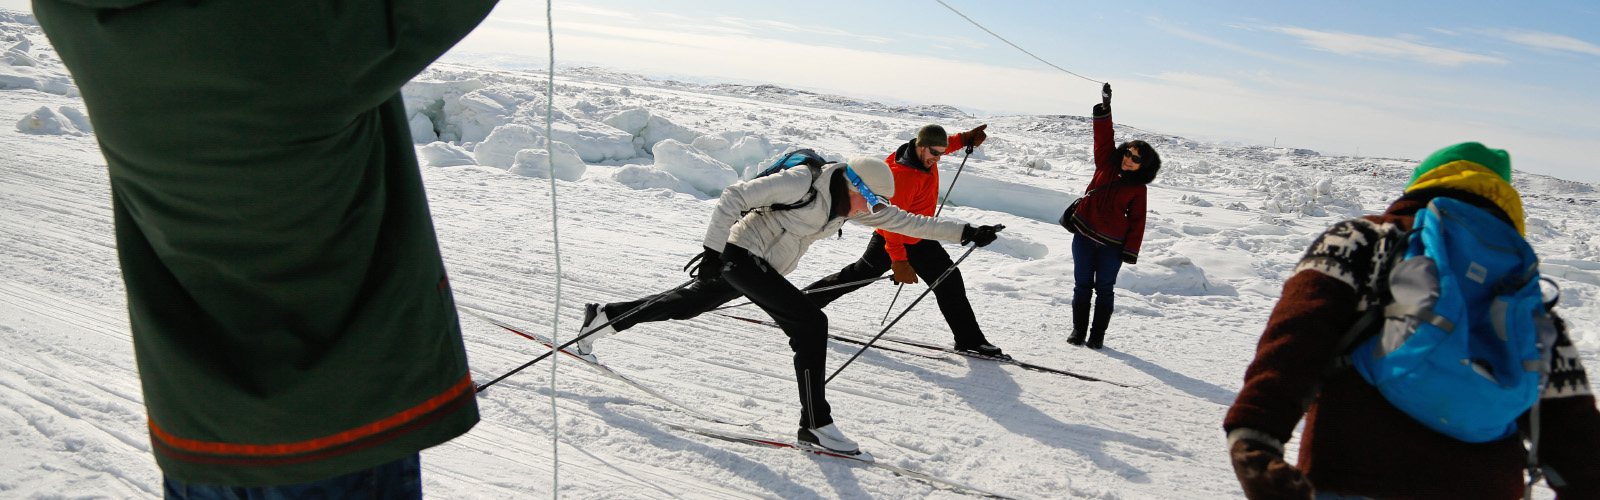 Image of people cross-country skiing and having fun on a sunny day on the sea ice in Nunavut.